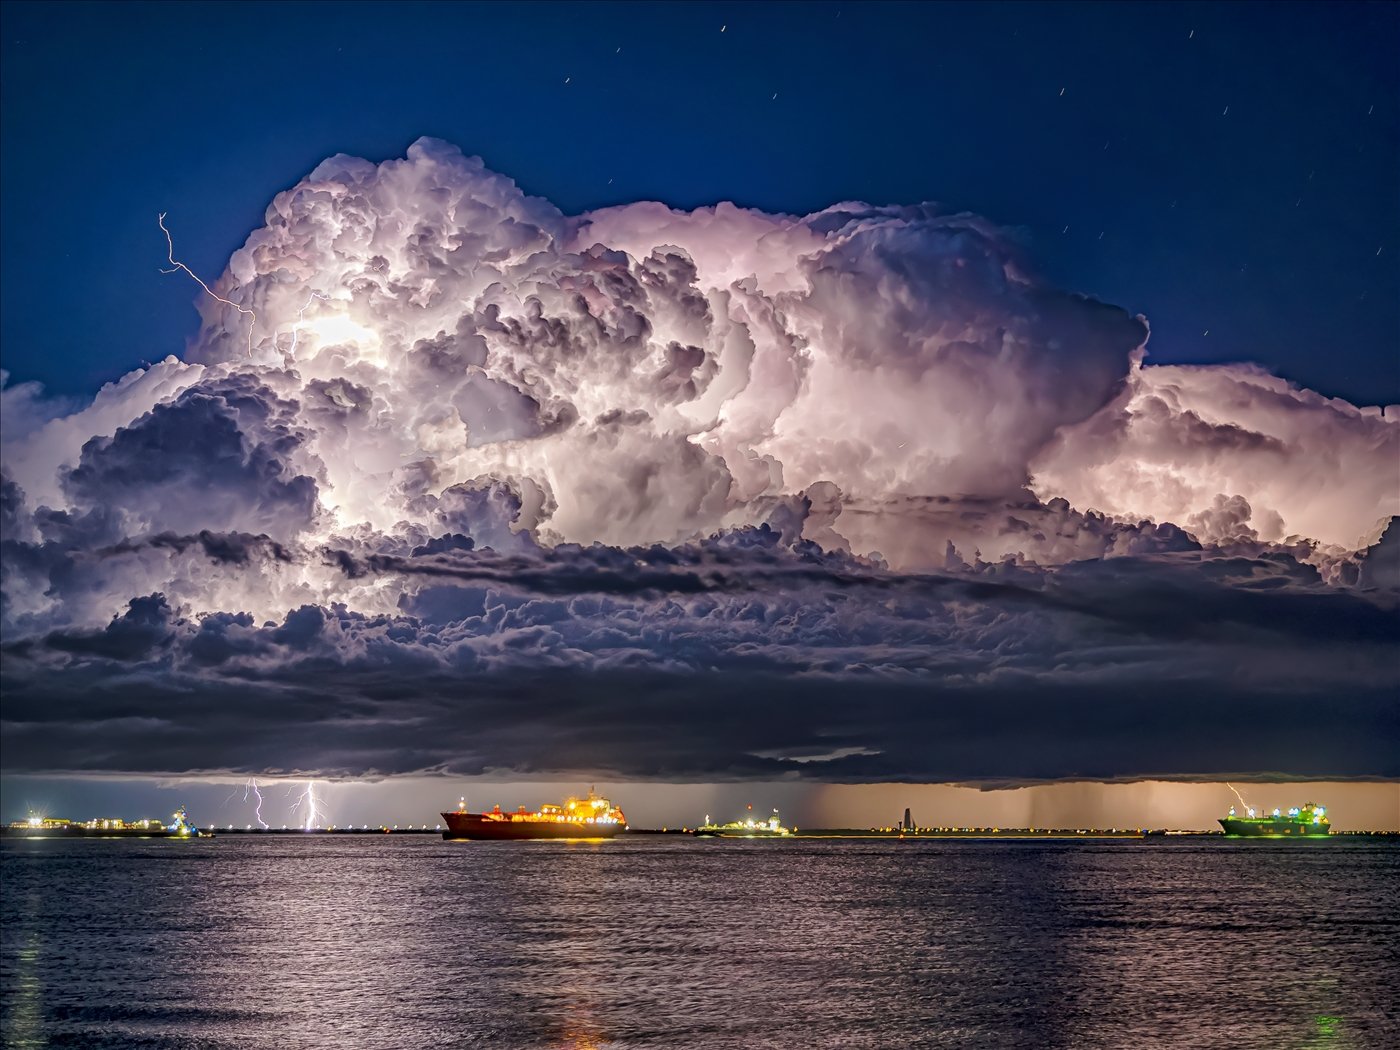  Stormy Bolivar,	Jerry Connally,	Beaumont Camera Club, 2nd Place